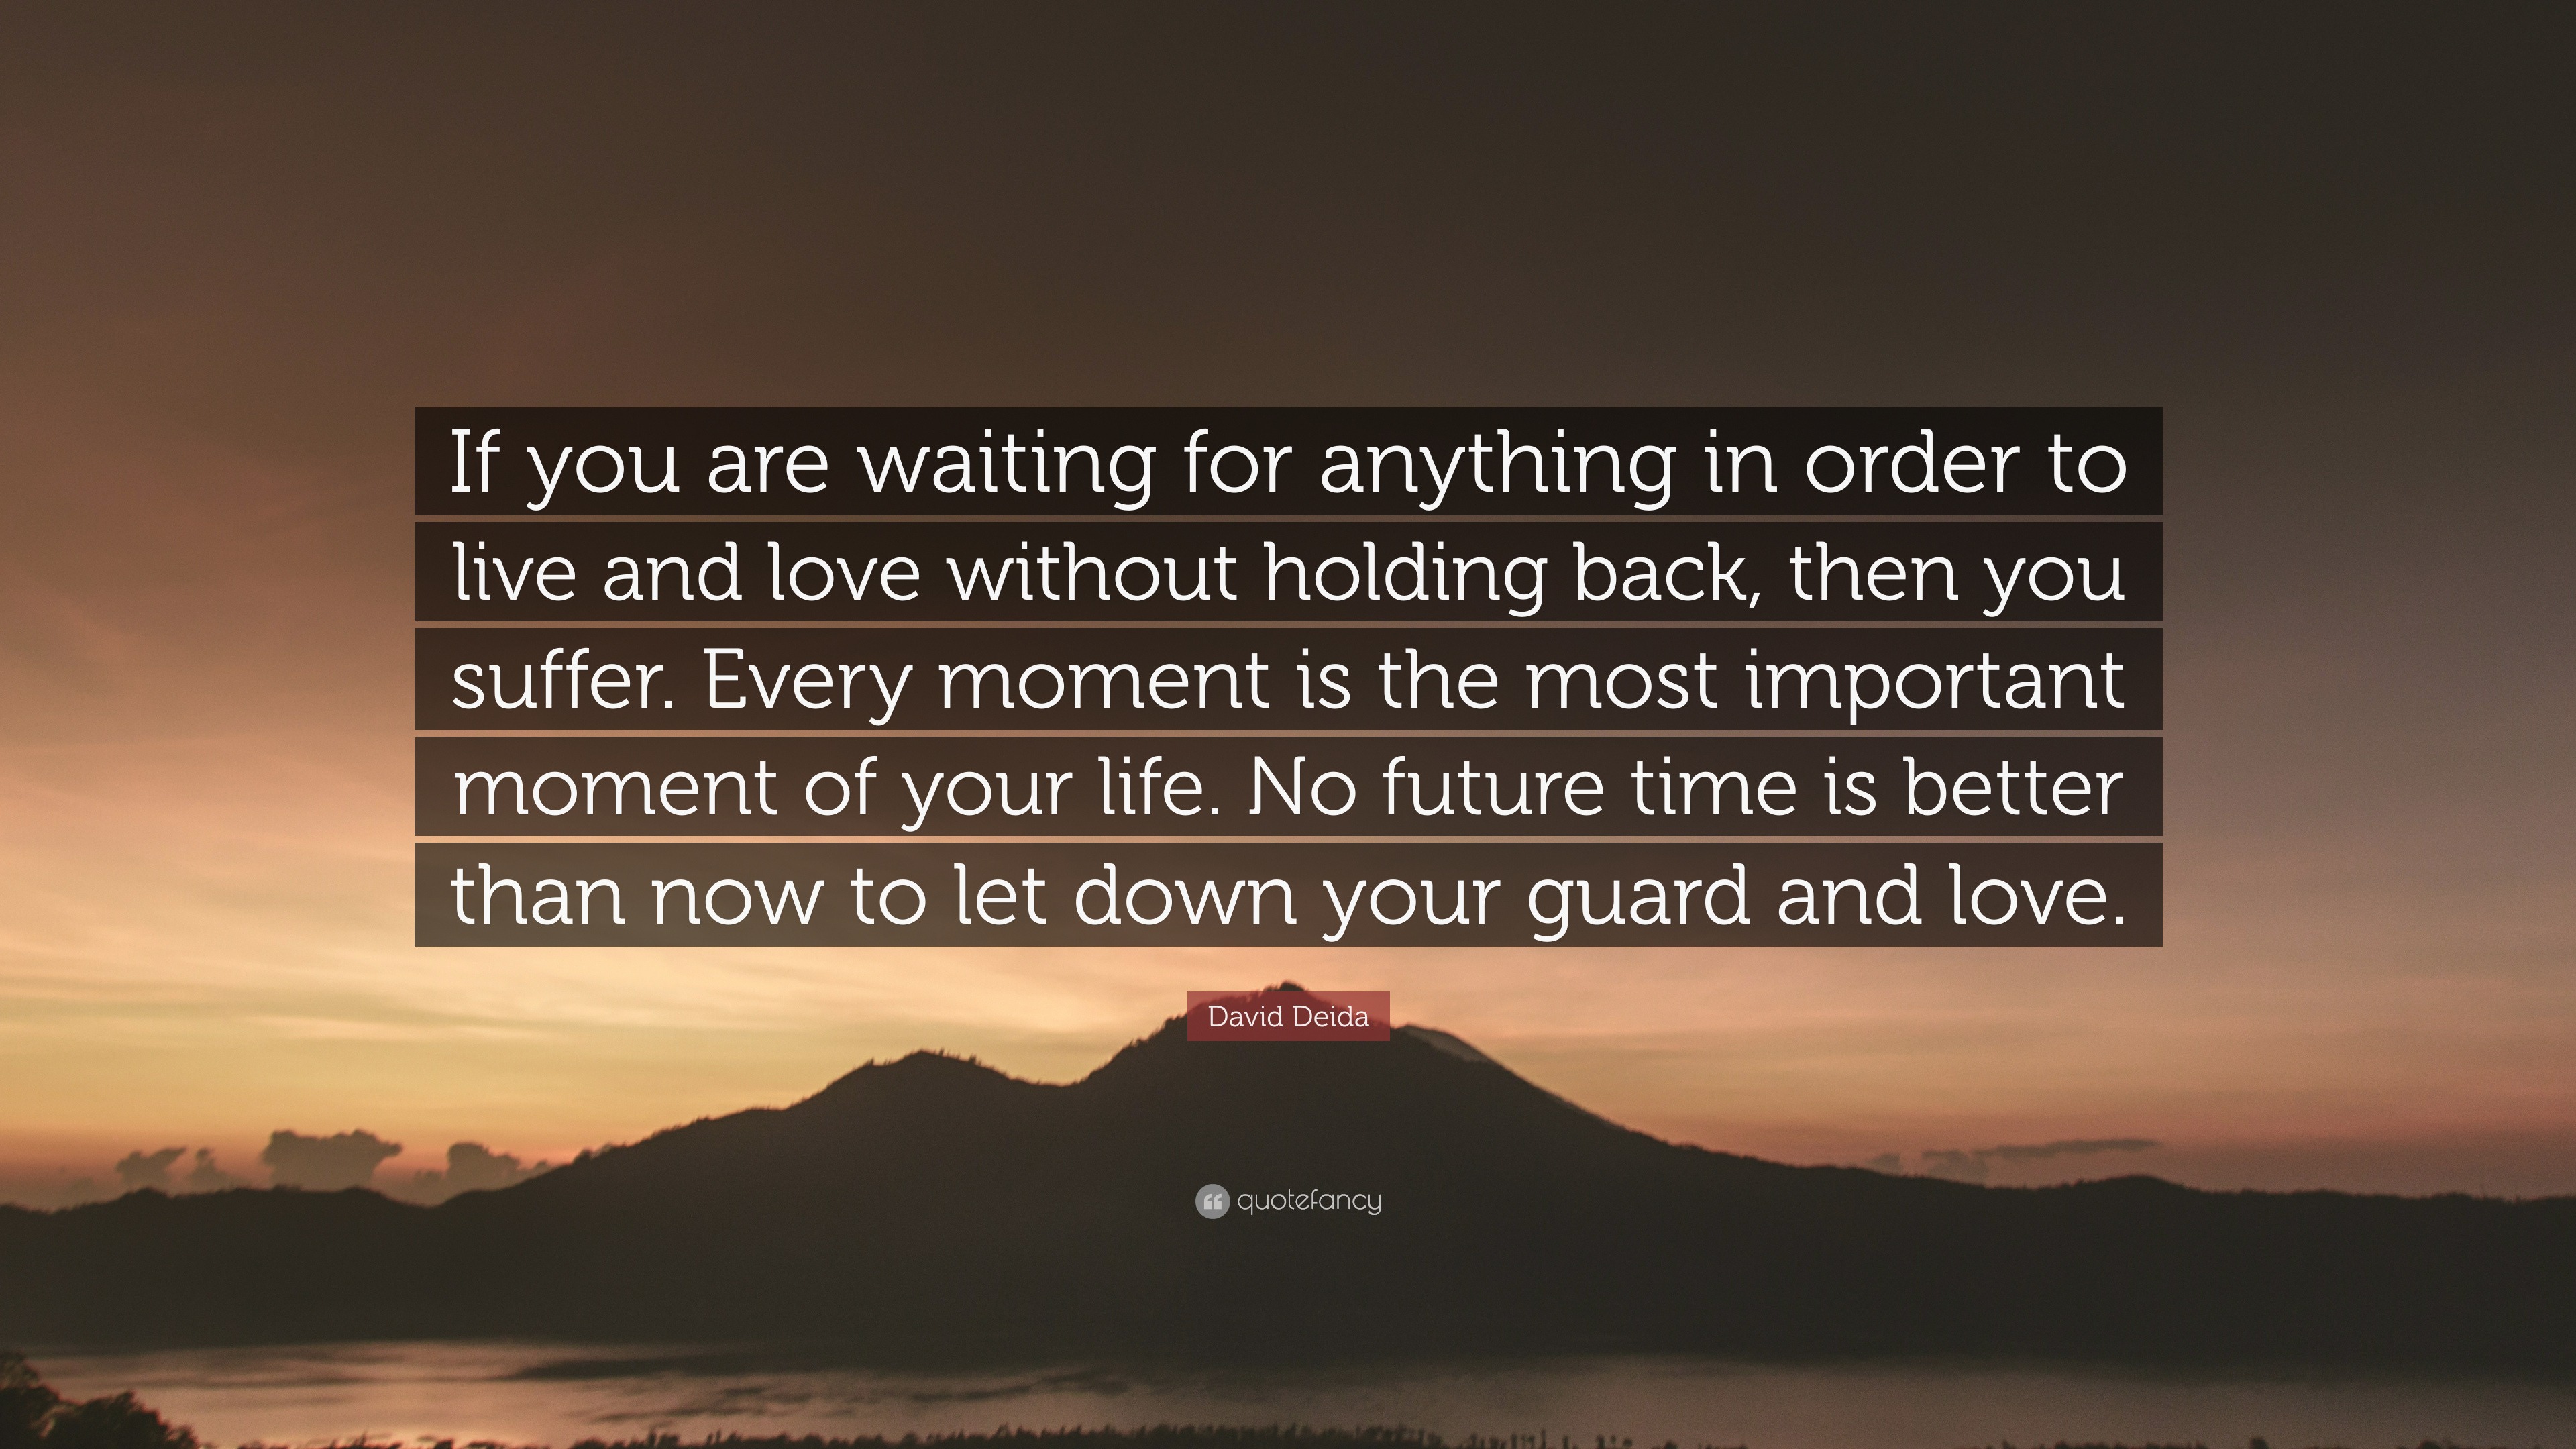 David Deida Quote “If you are waiting for anything in order to live and